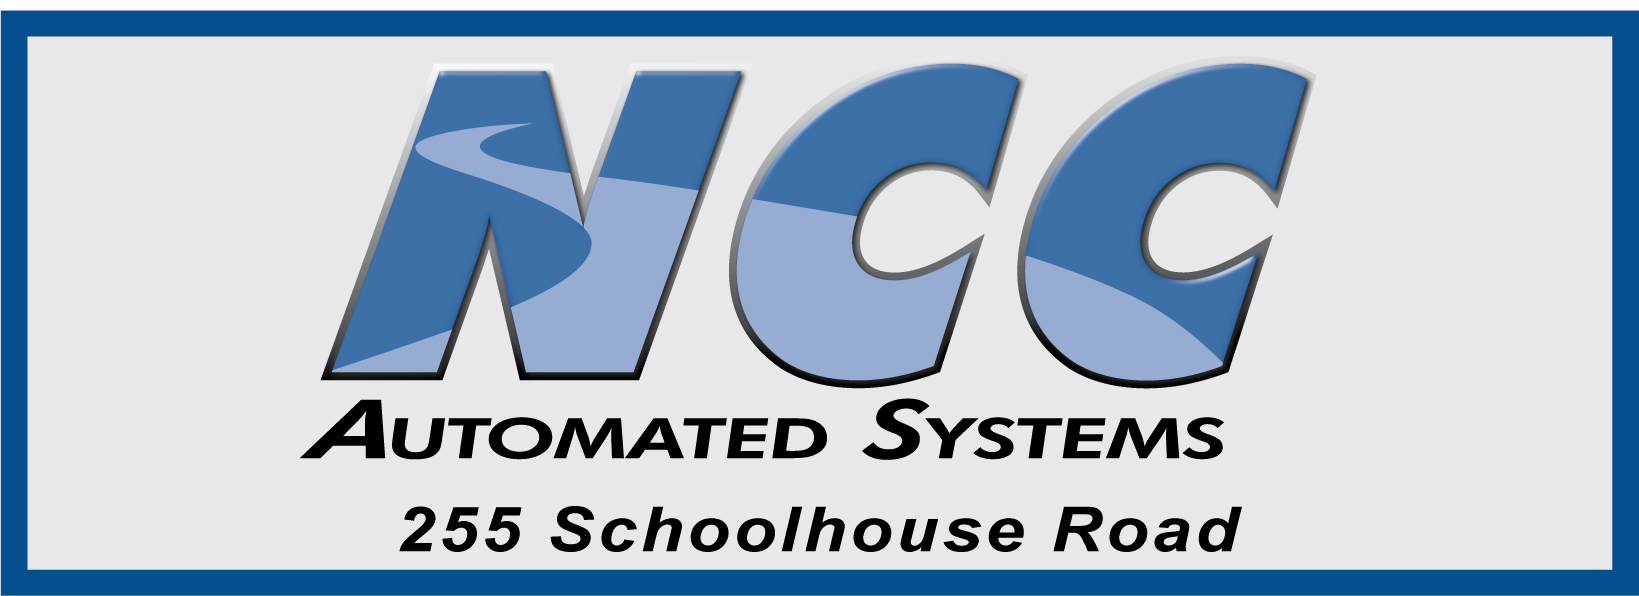 NCC Automated Systems